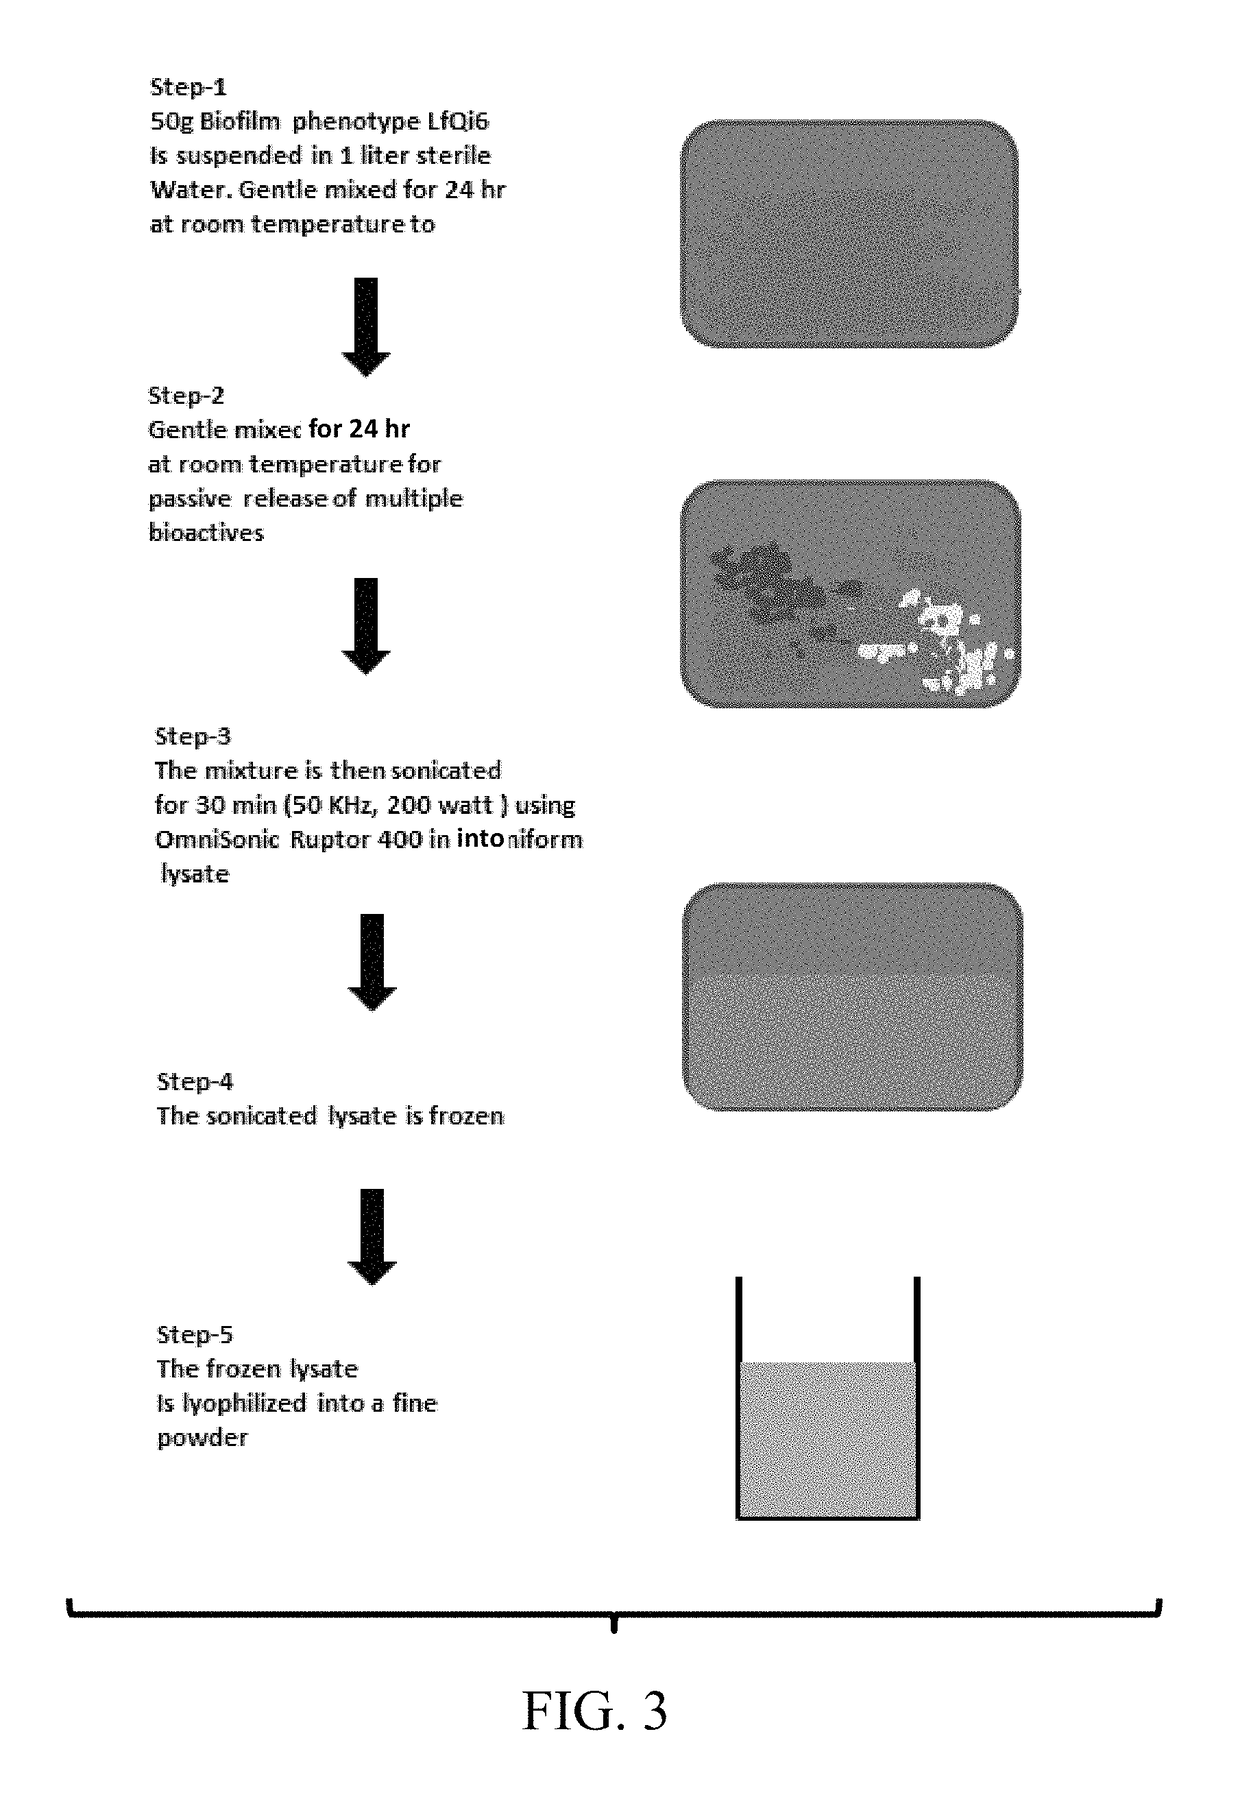 Materials and methods for improving immune responses and skin and/or mucosal barrier functions